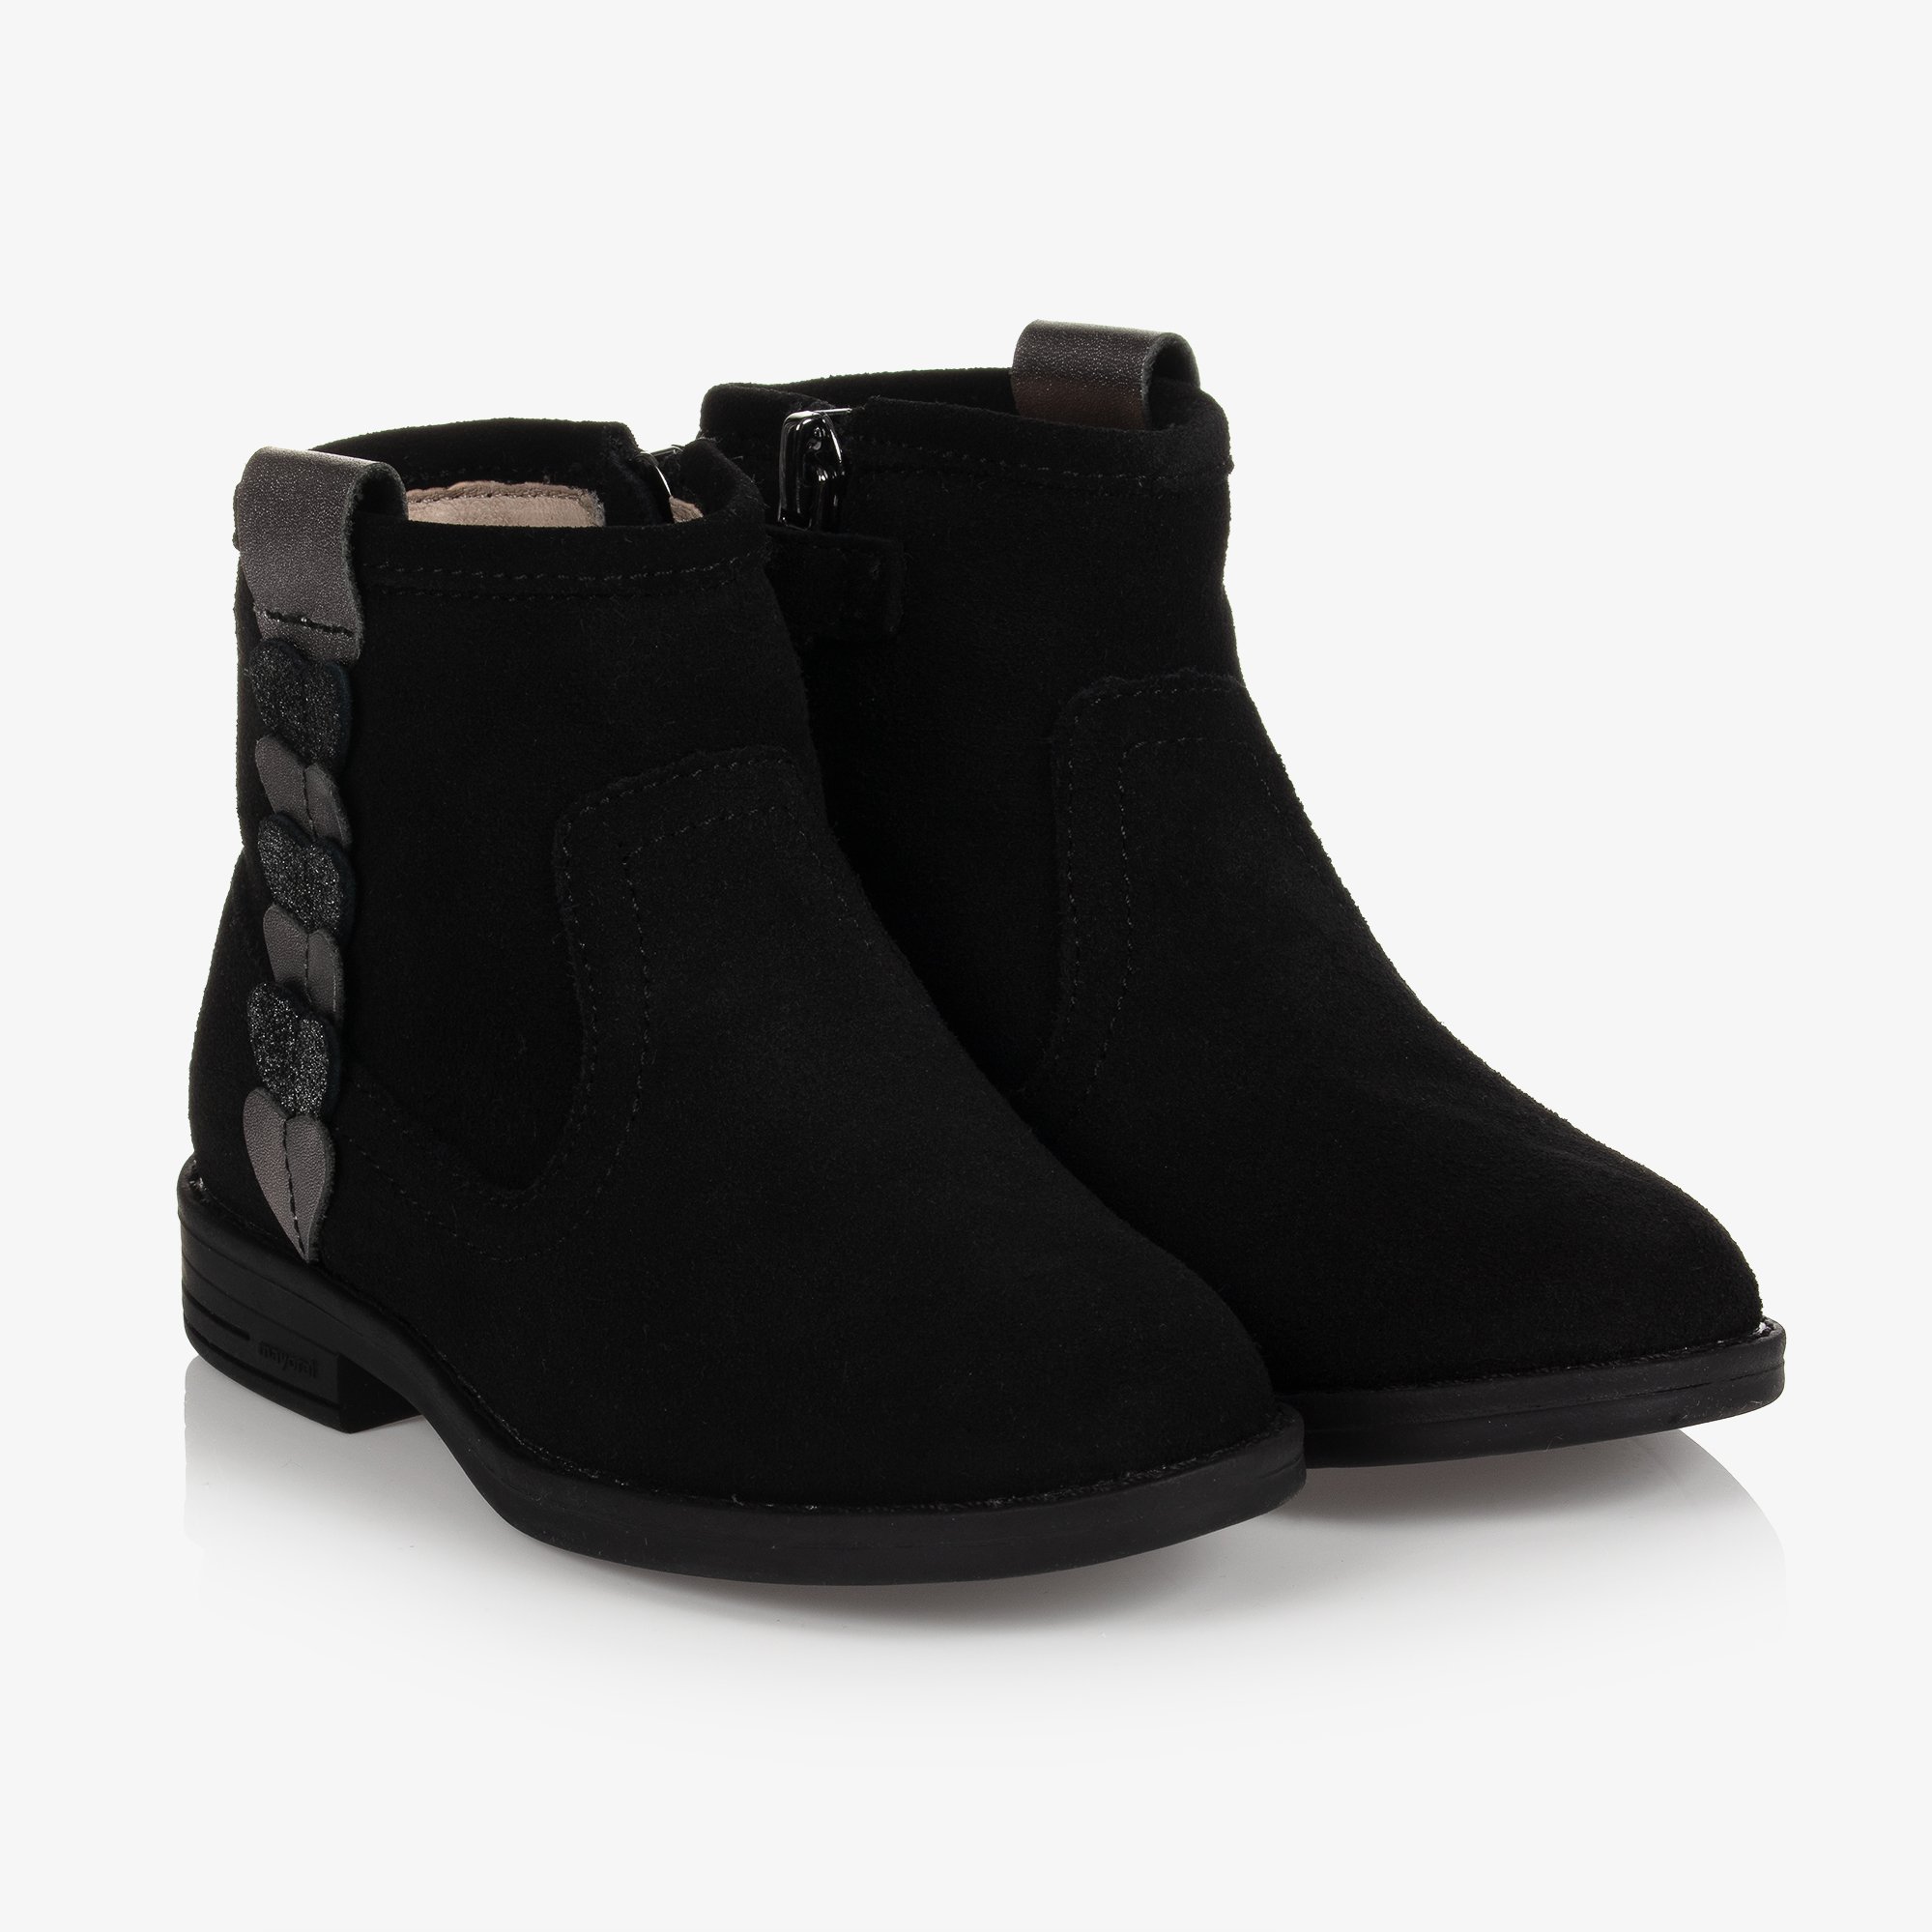 Mayoral Heart-Trim Ankle Boots in Black Suede.jpg